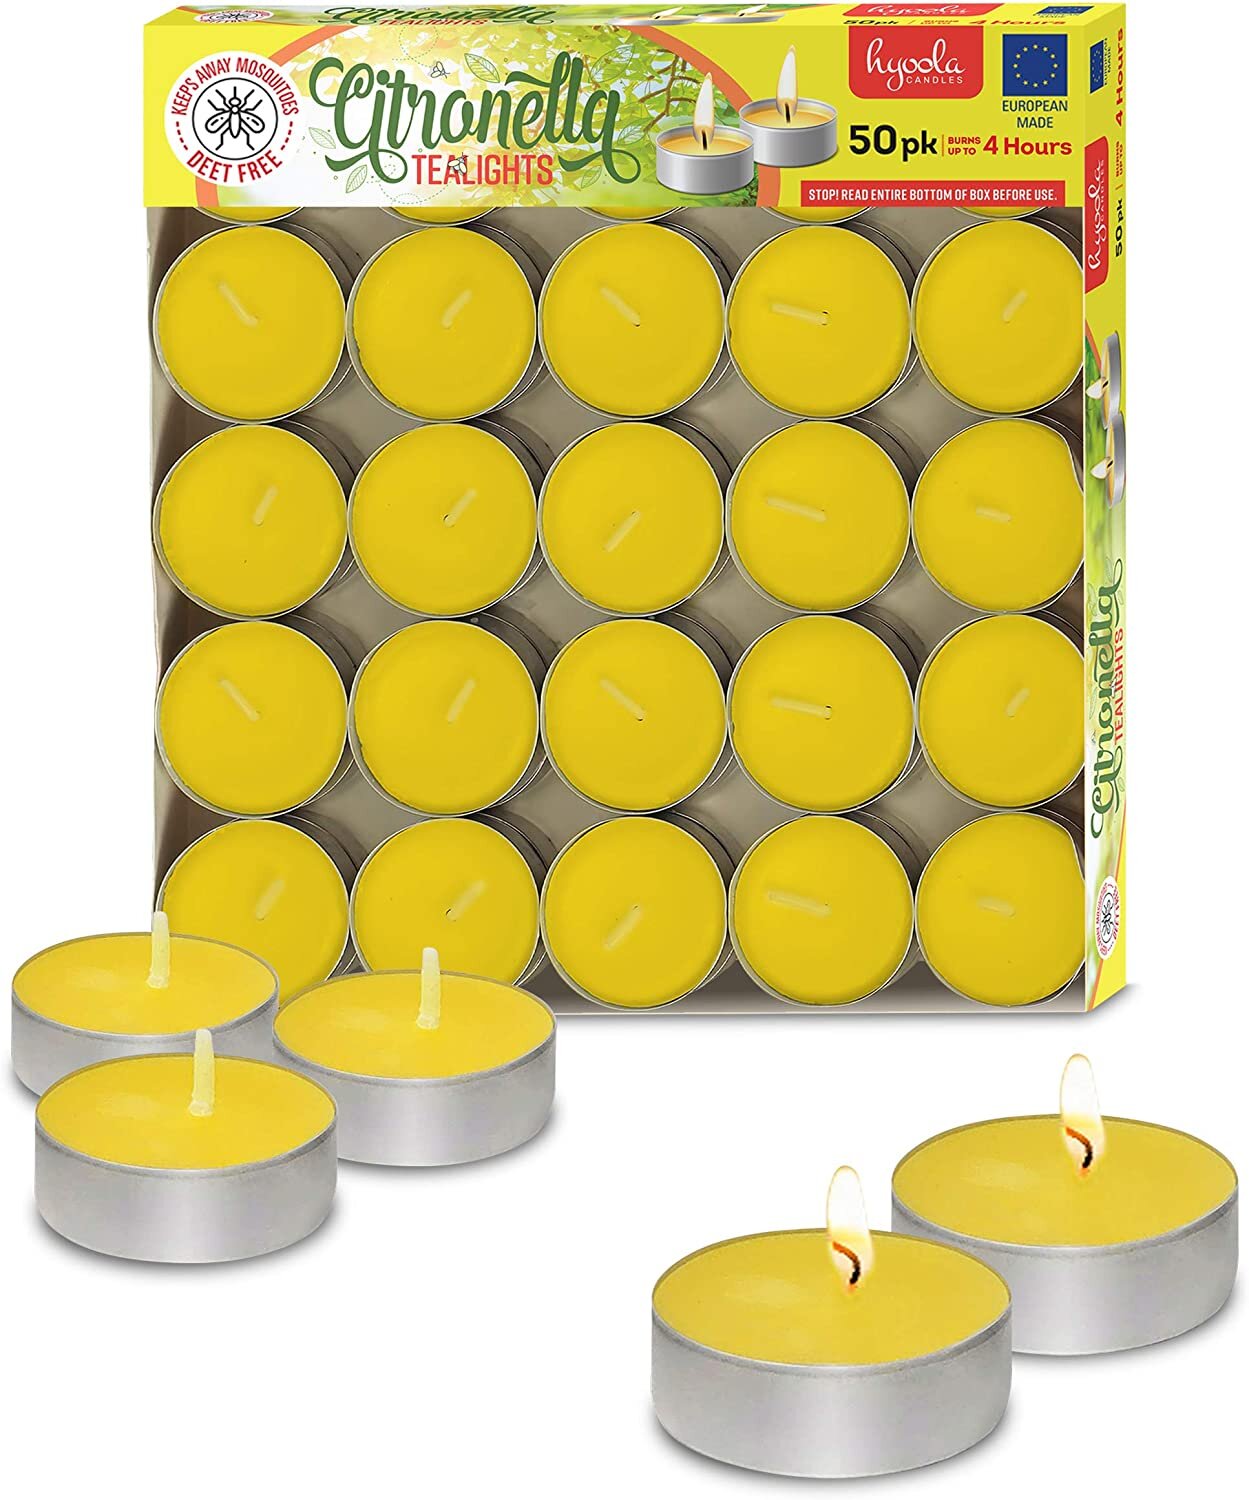 Citronella Scented Tea Light Candles Mosquitoes Repellent 4 hours 2 x 60 Pack